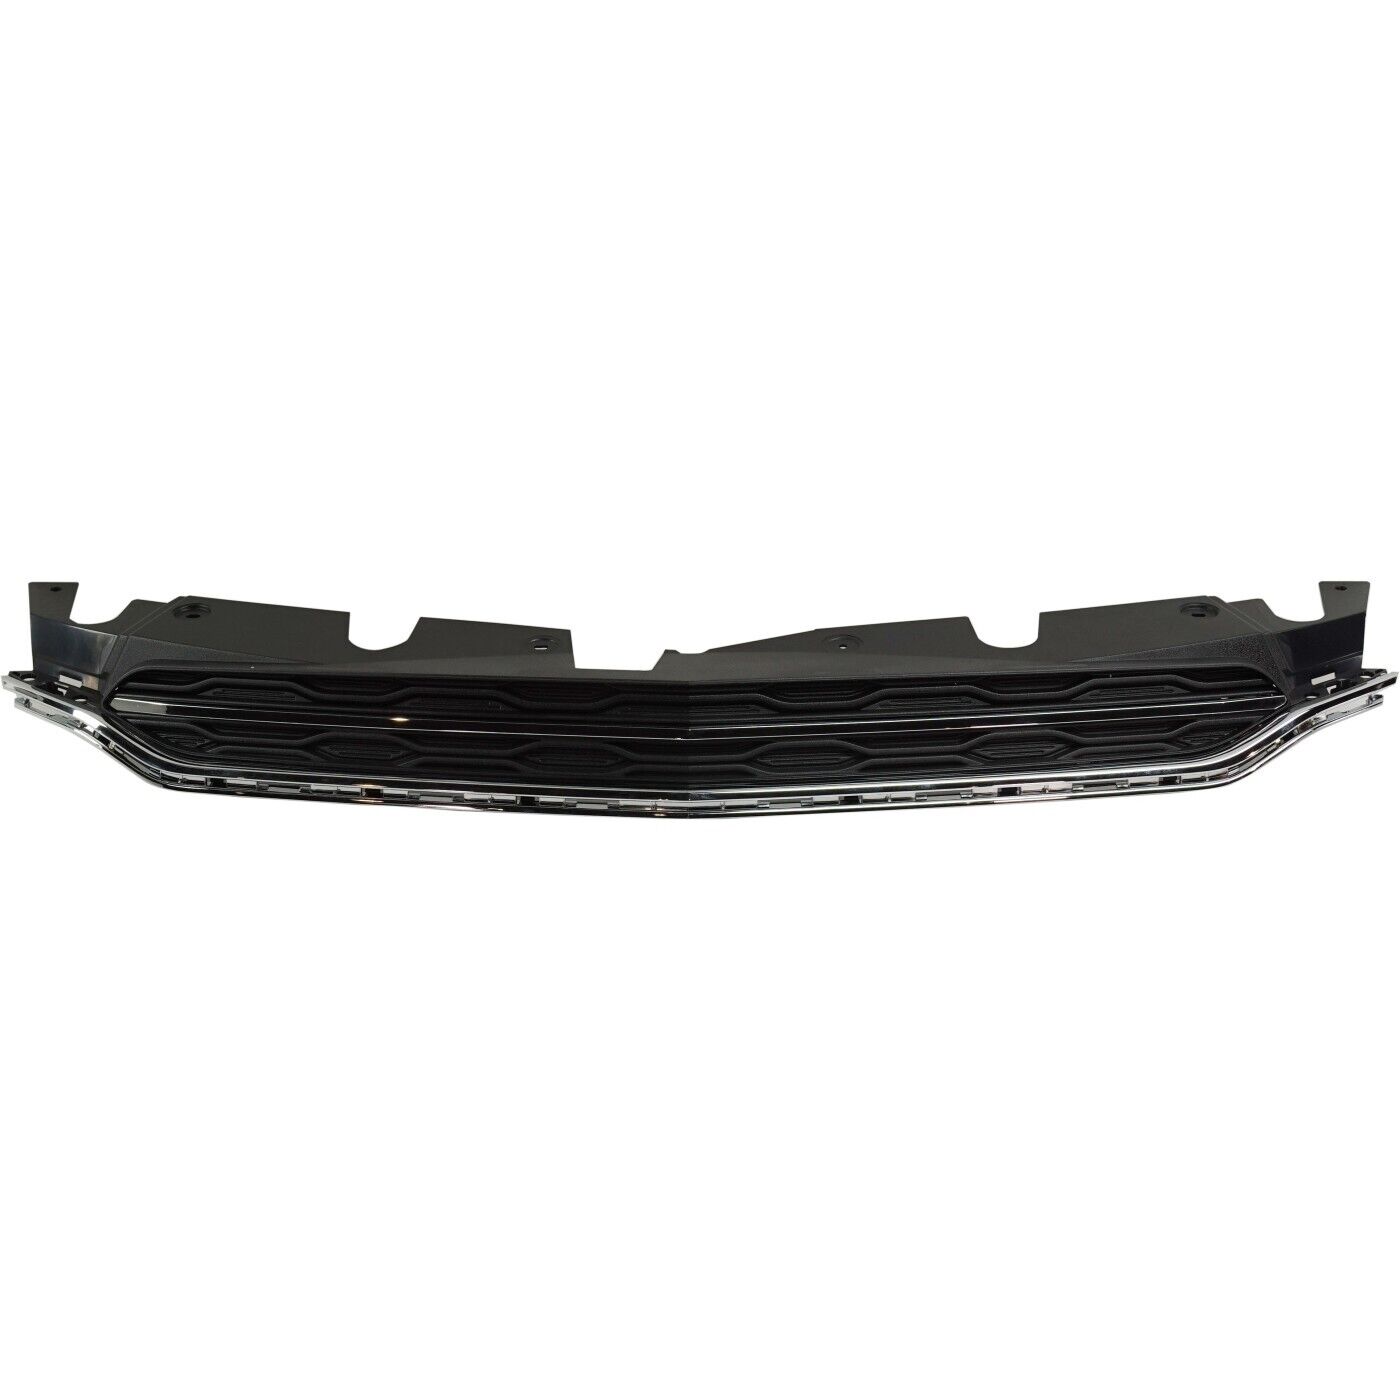 Grille Grill for Chevy 23382107 Chevrolet Equinox 2016-2017